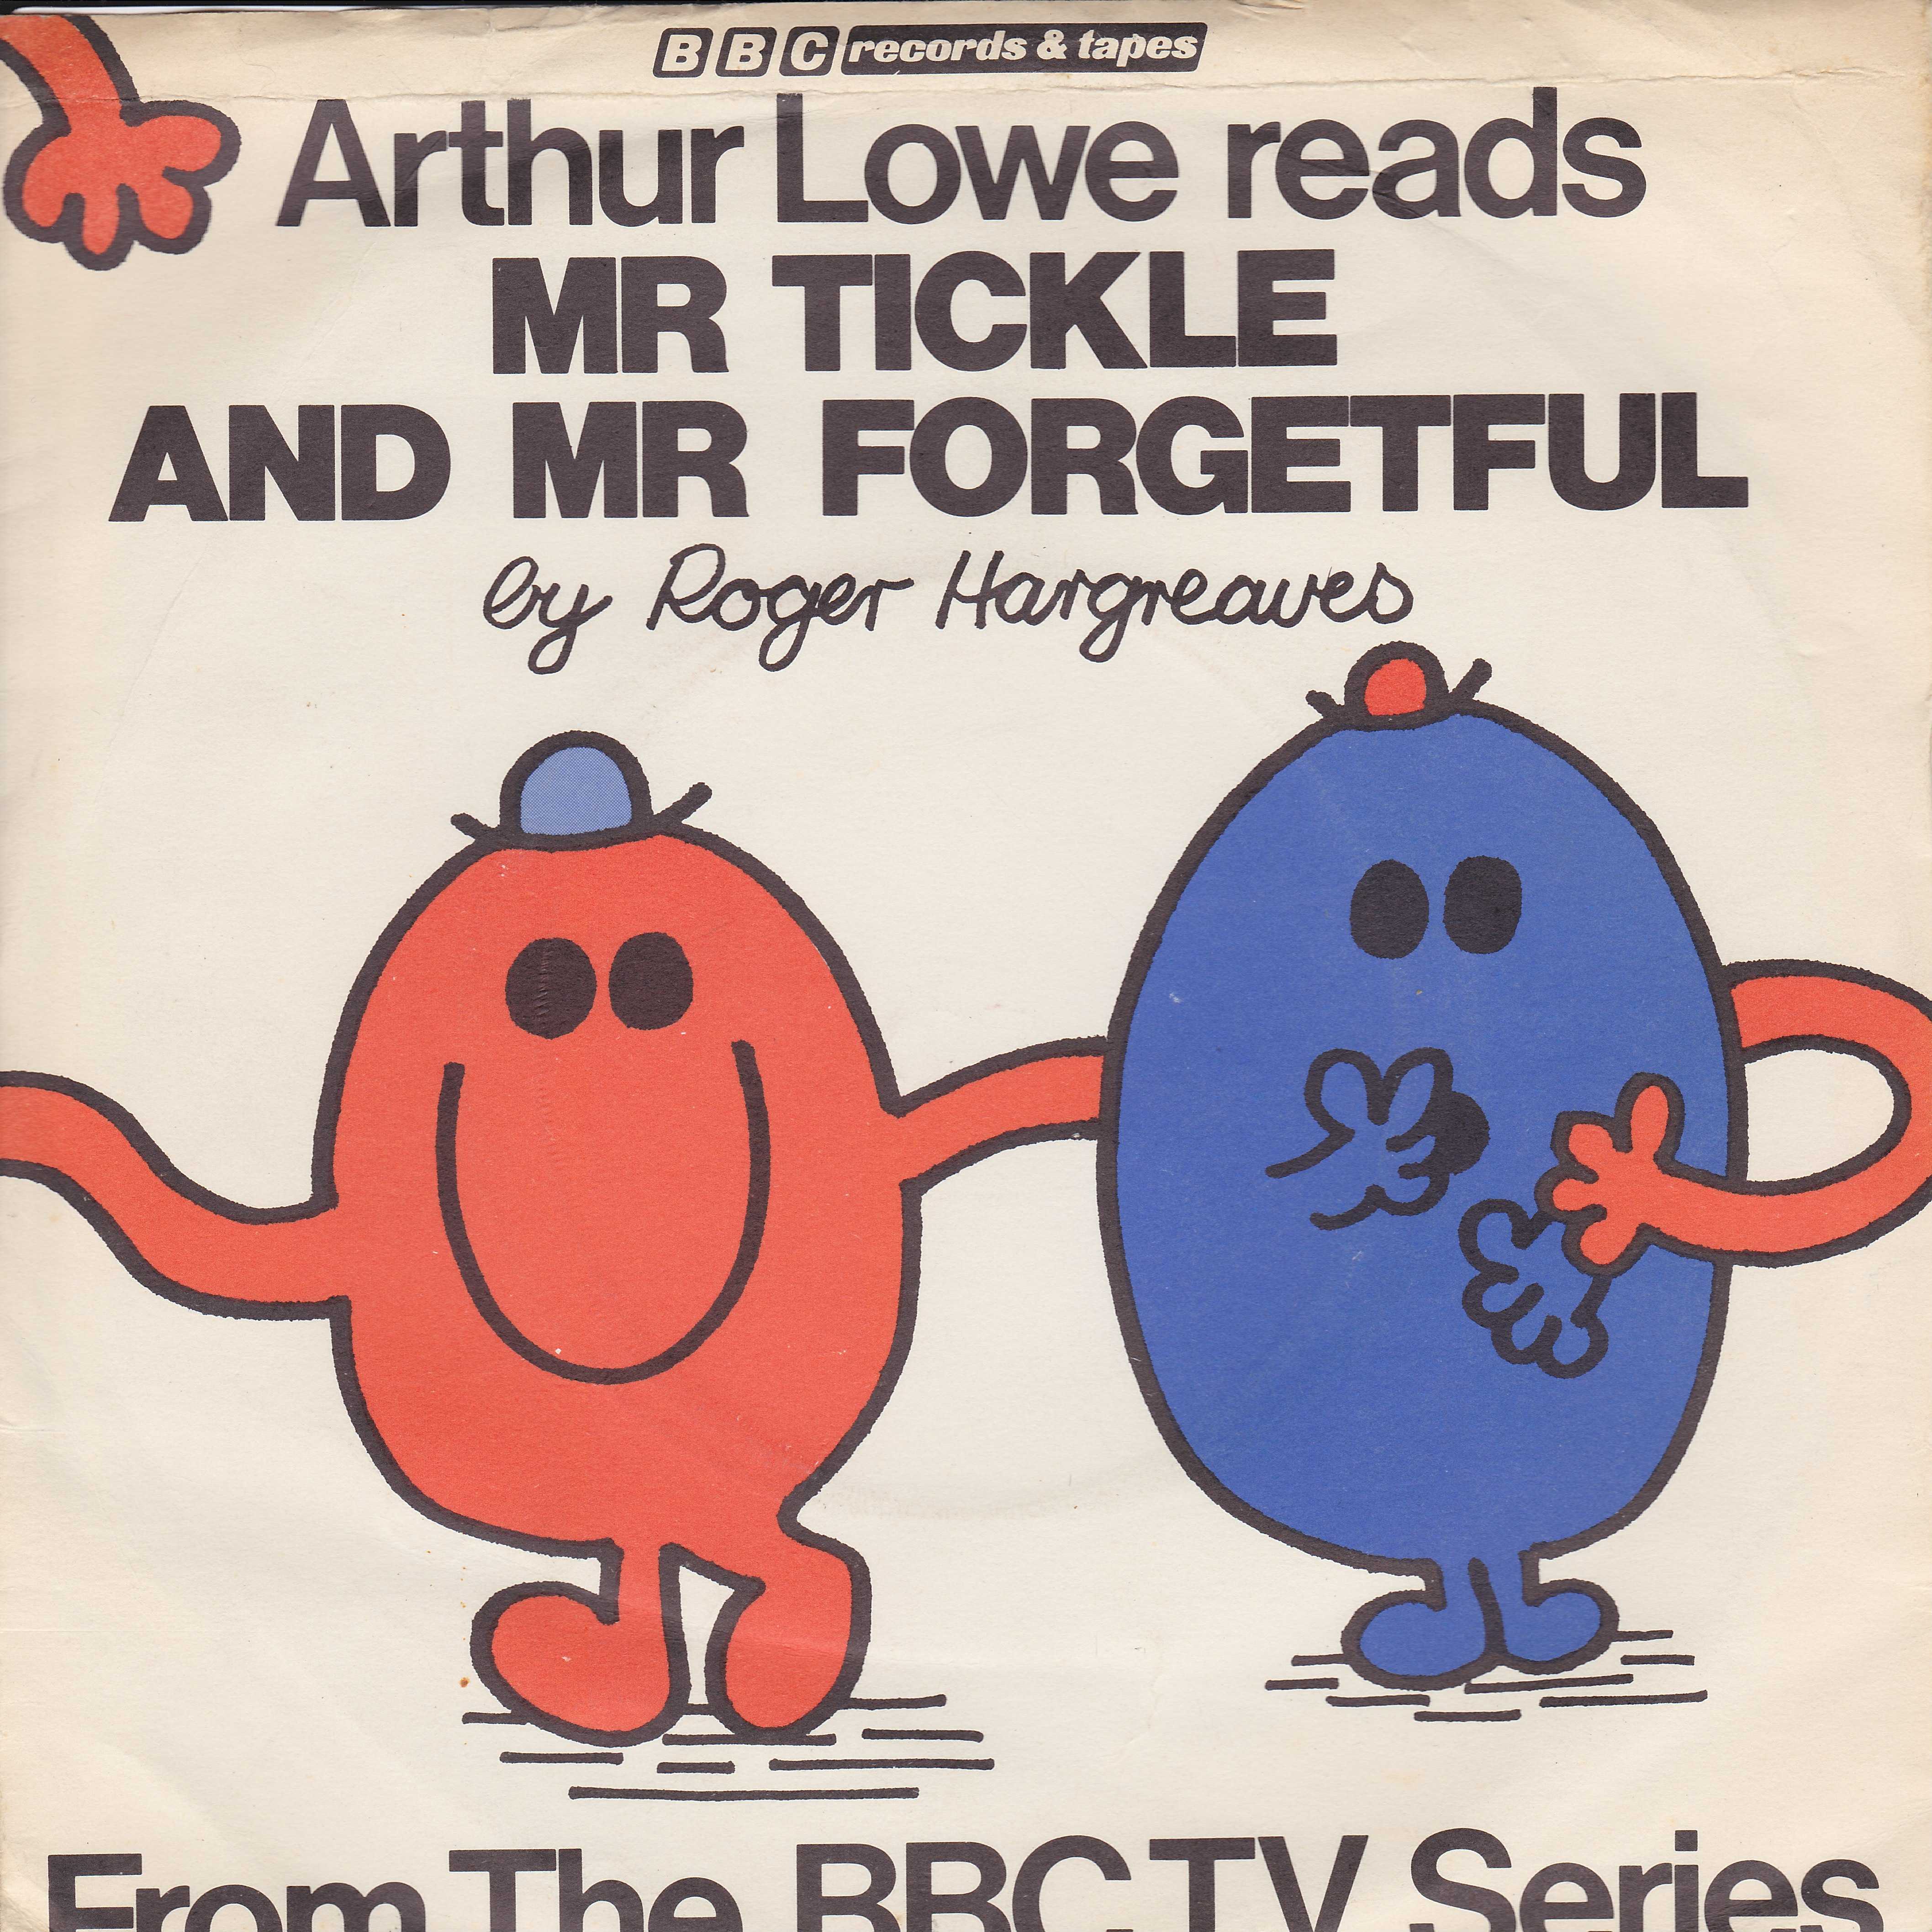 Picture of RESL 43 Mr Men - Mr Tickle by artist Roger Hargreaves from the BBC records and Tapes library